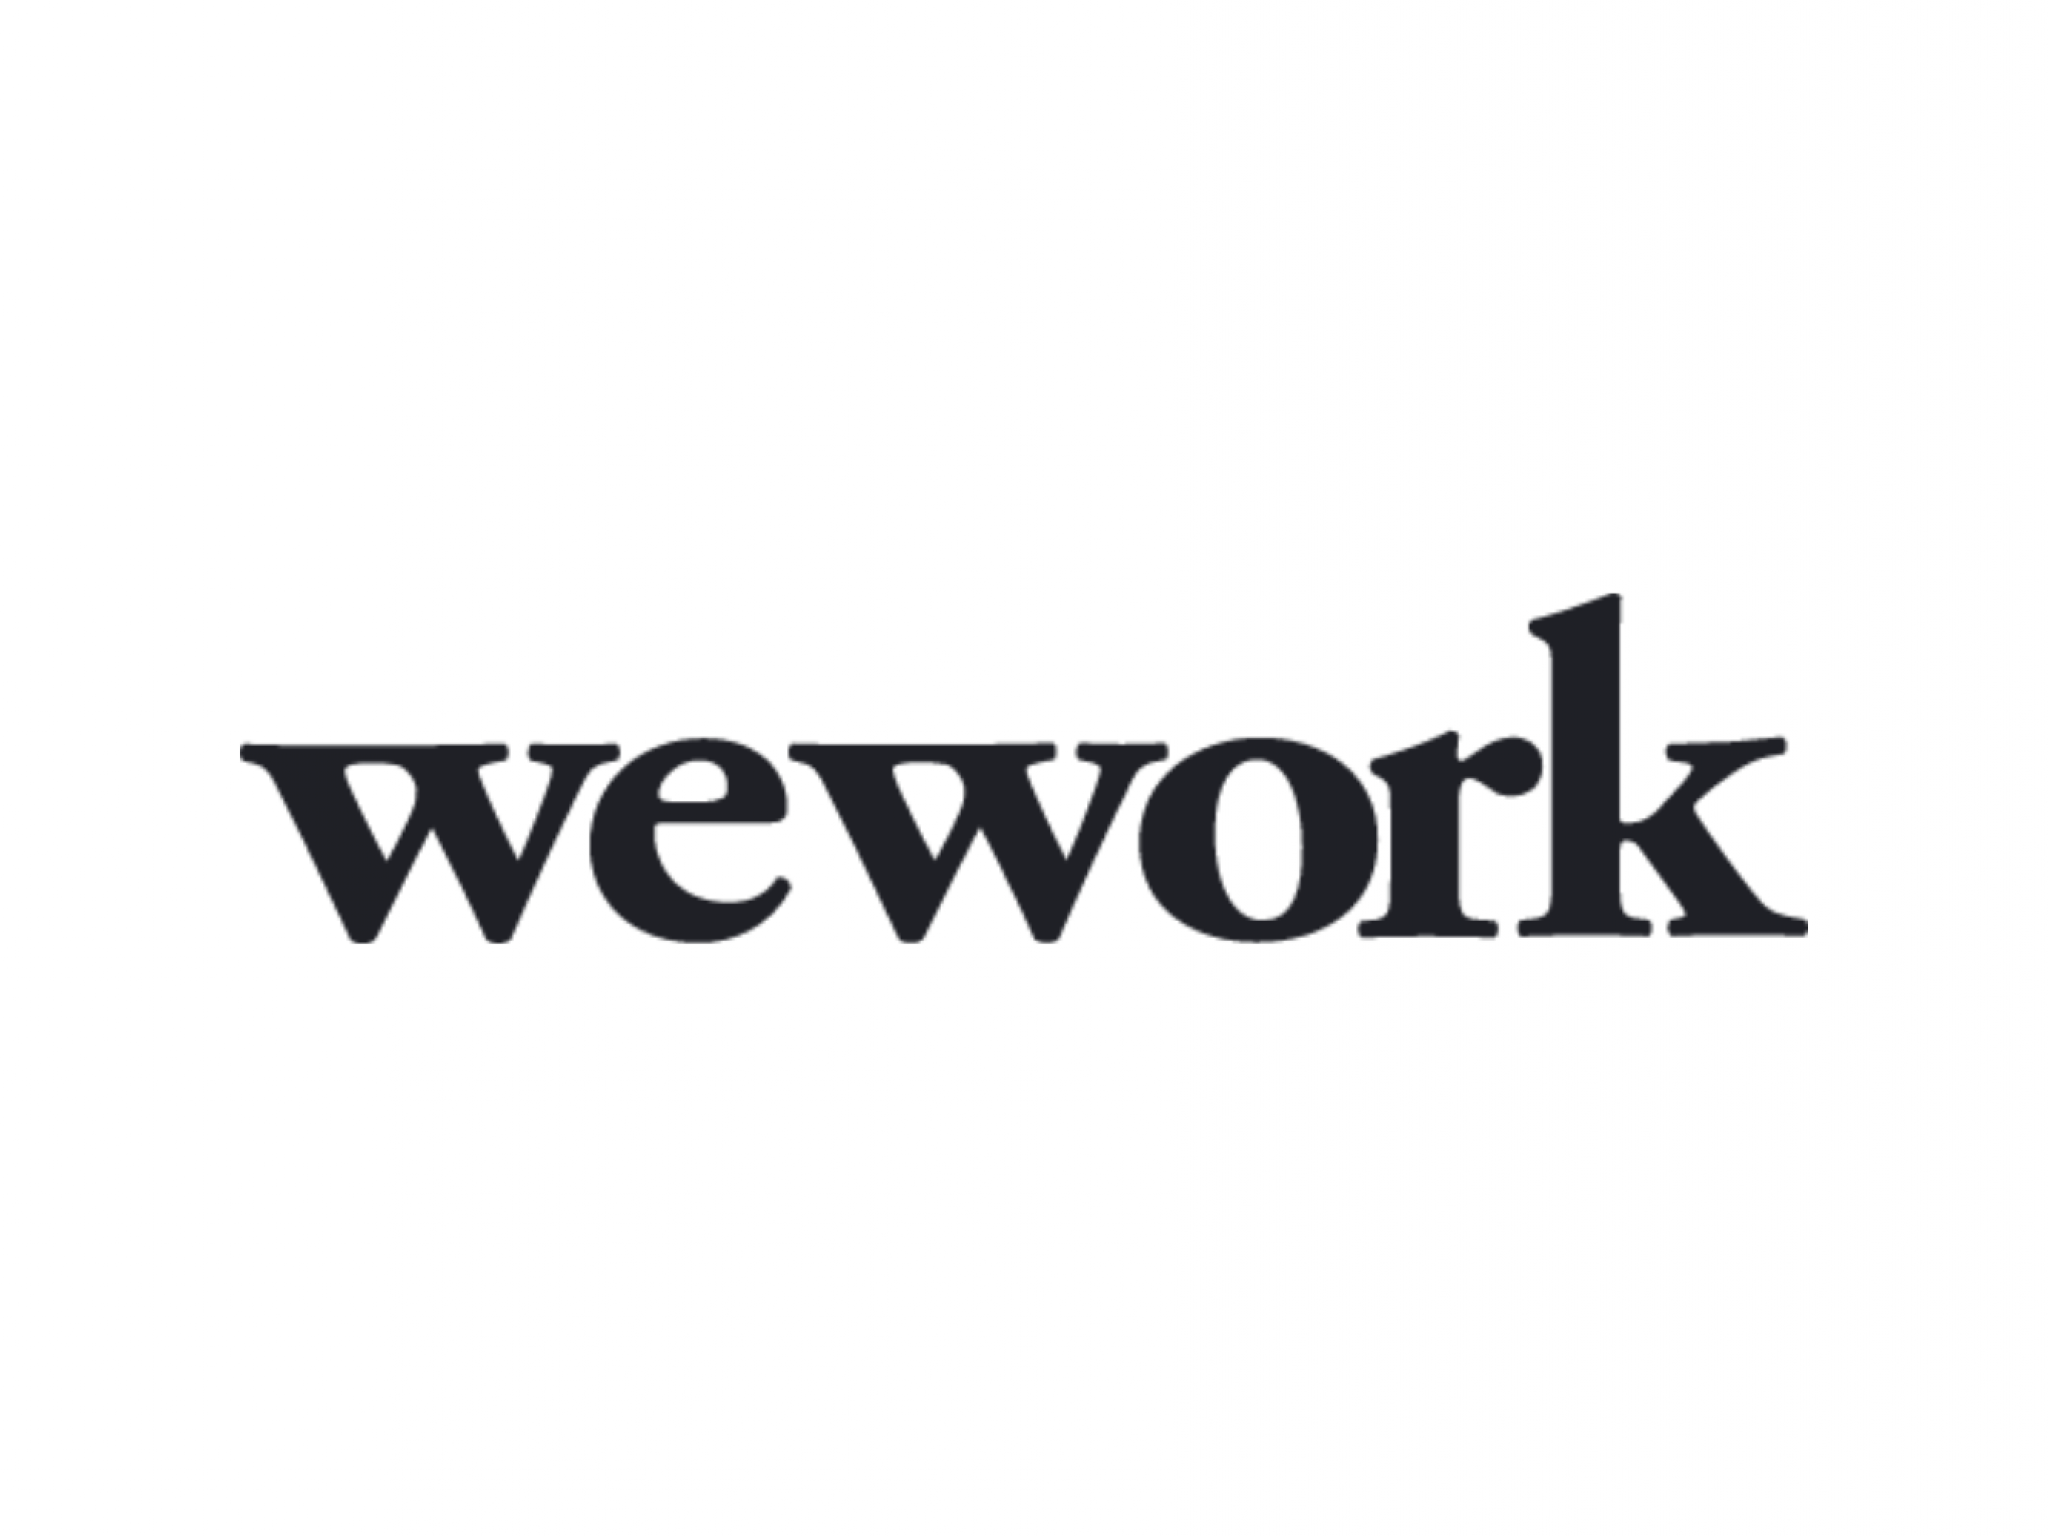  wework-names-david-tolley-as-ceo-amid-ongoing-transformation-efforts 